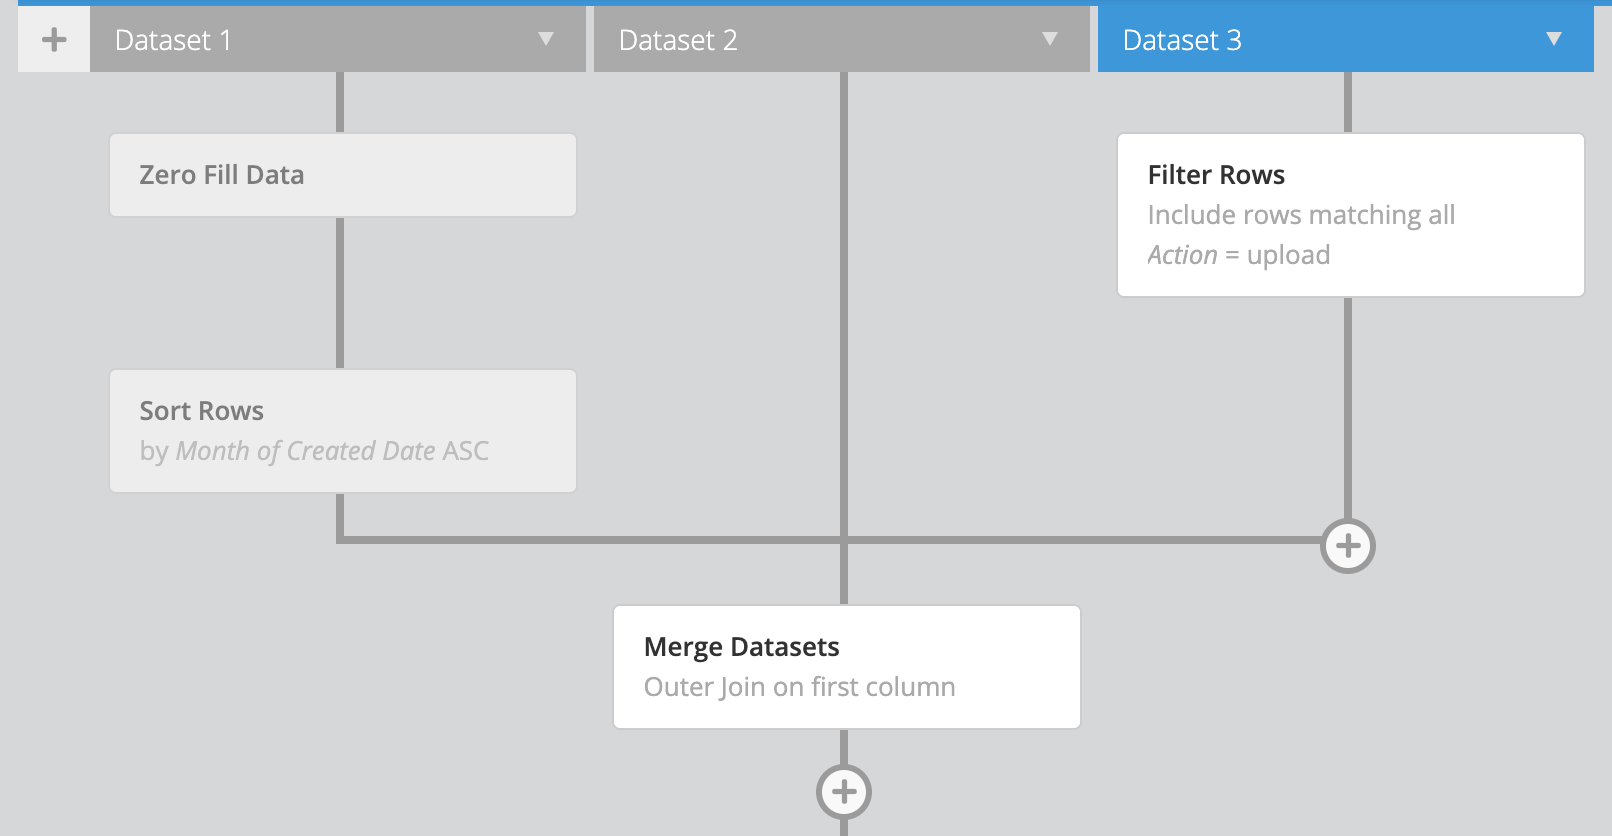 Data Pipeline includes all post-query transformation steps and merges